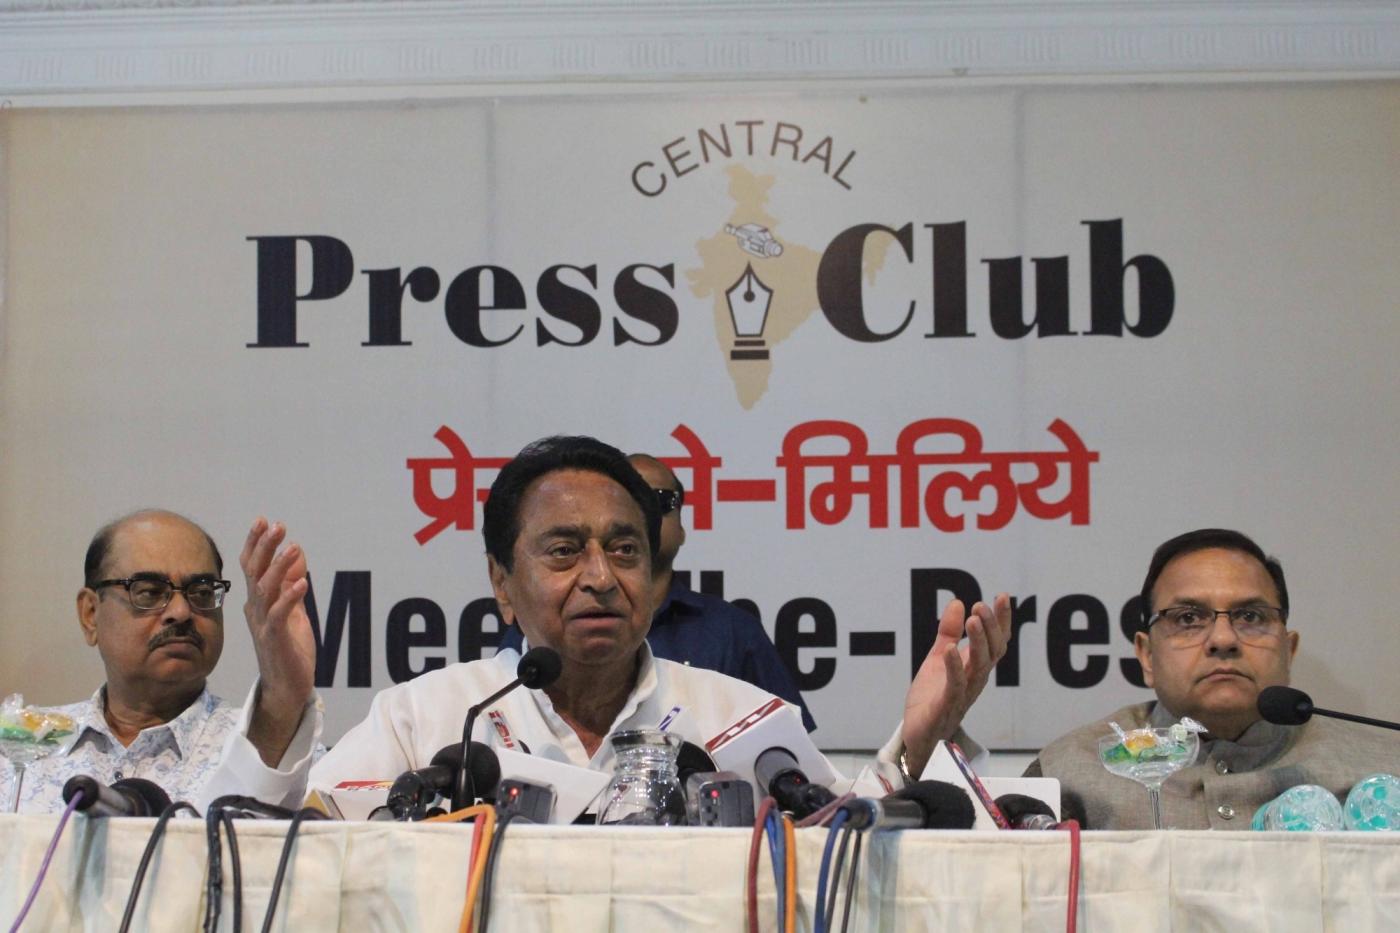 Bhopal: Congress leader Kamal Nath addresses a press conference in Bhopal on May 7, 2018. (Photo: IANS) by .